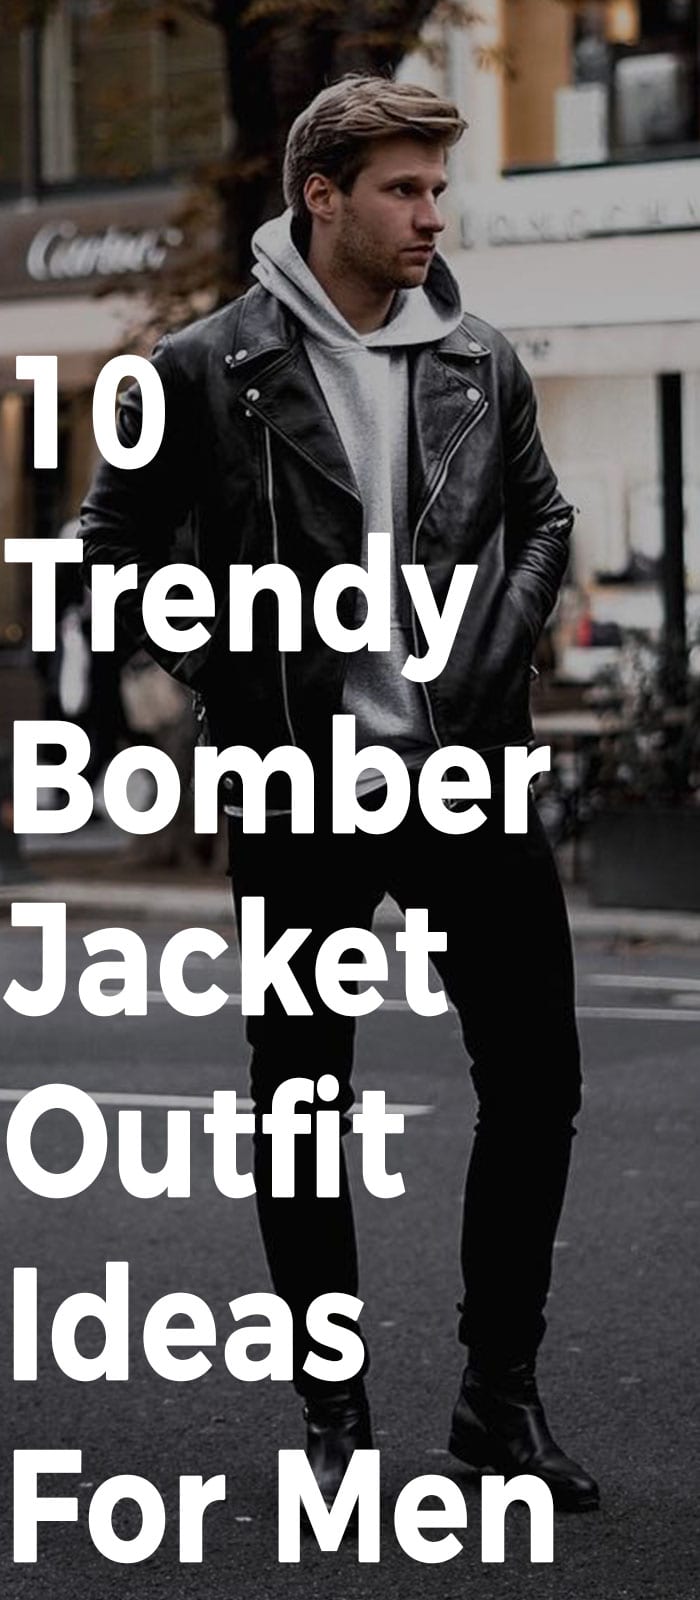 10 Trendy Bomber Jacket Outfit Ideas For Men This Season